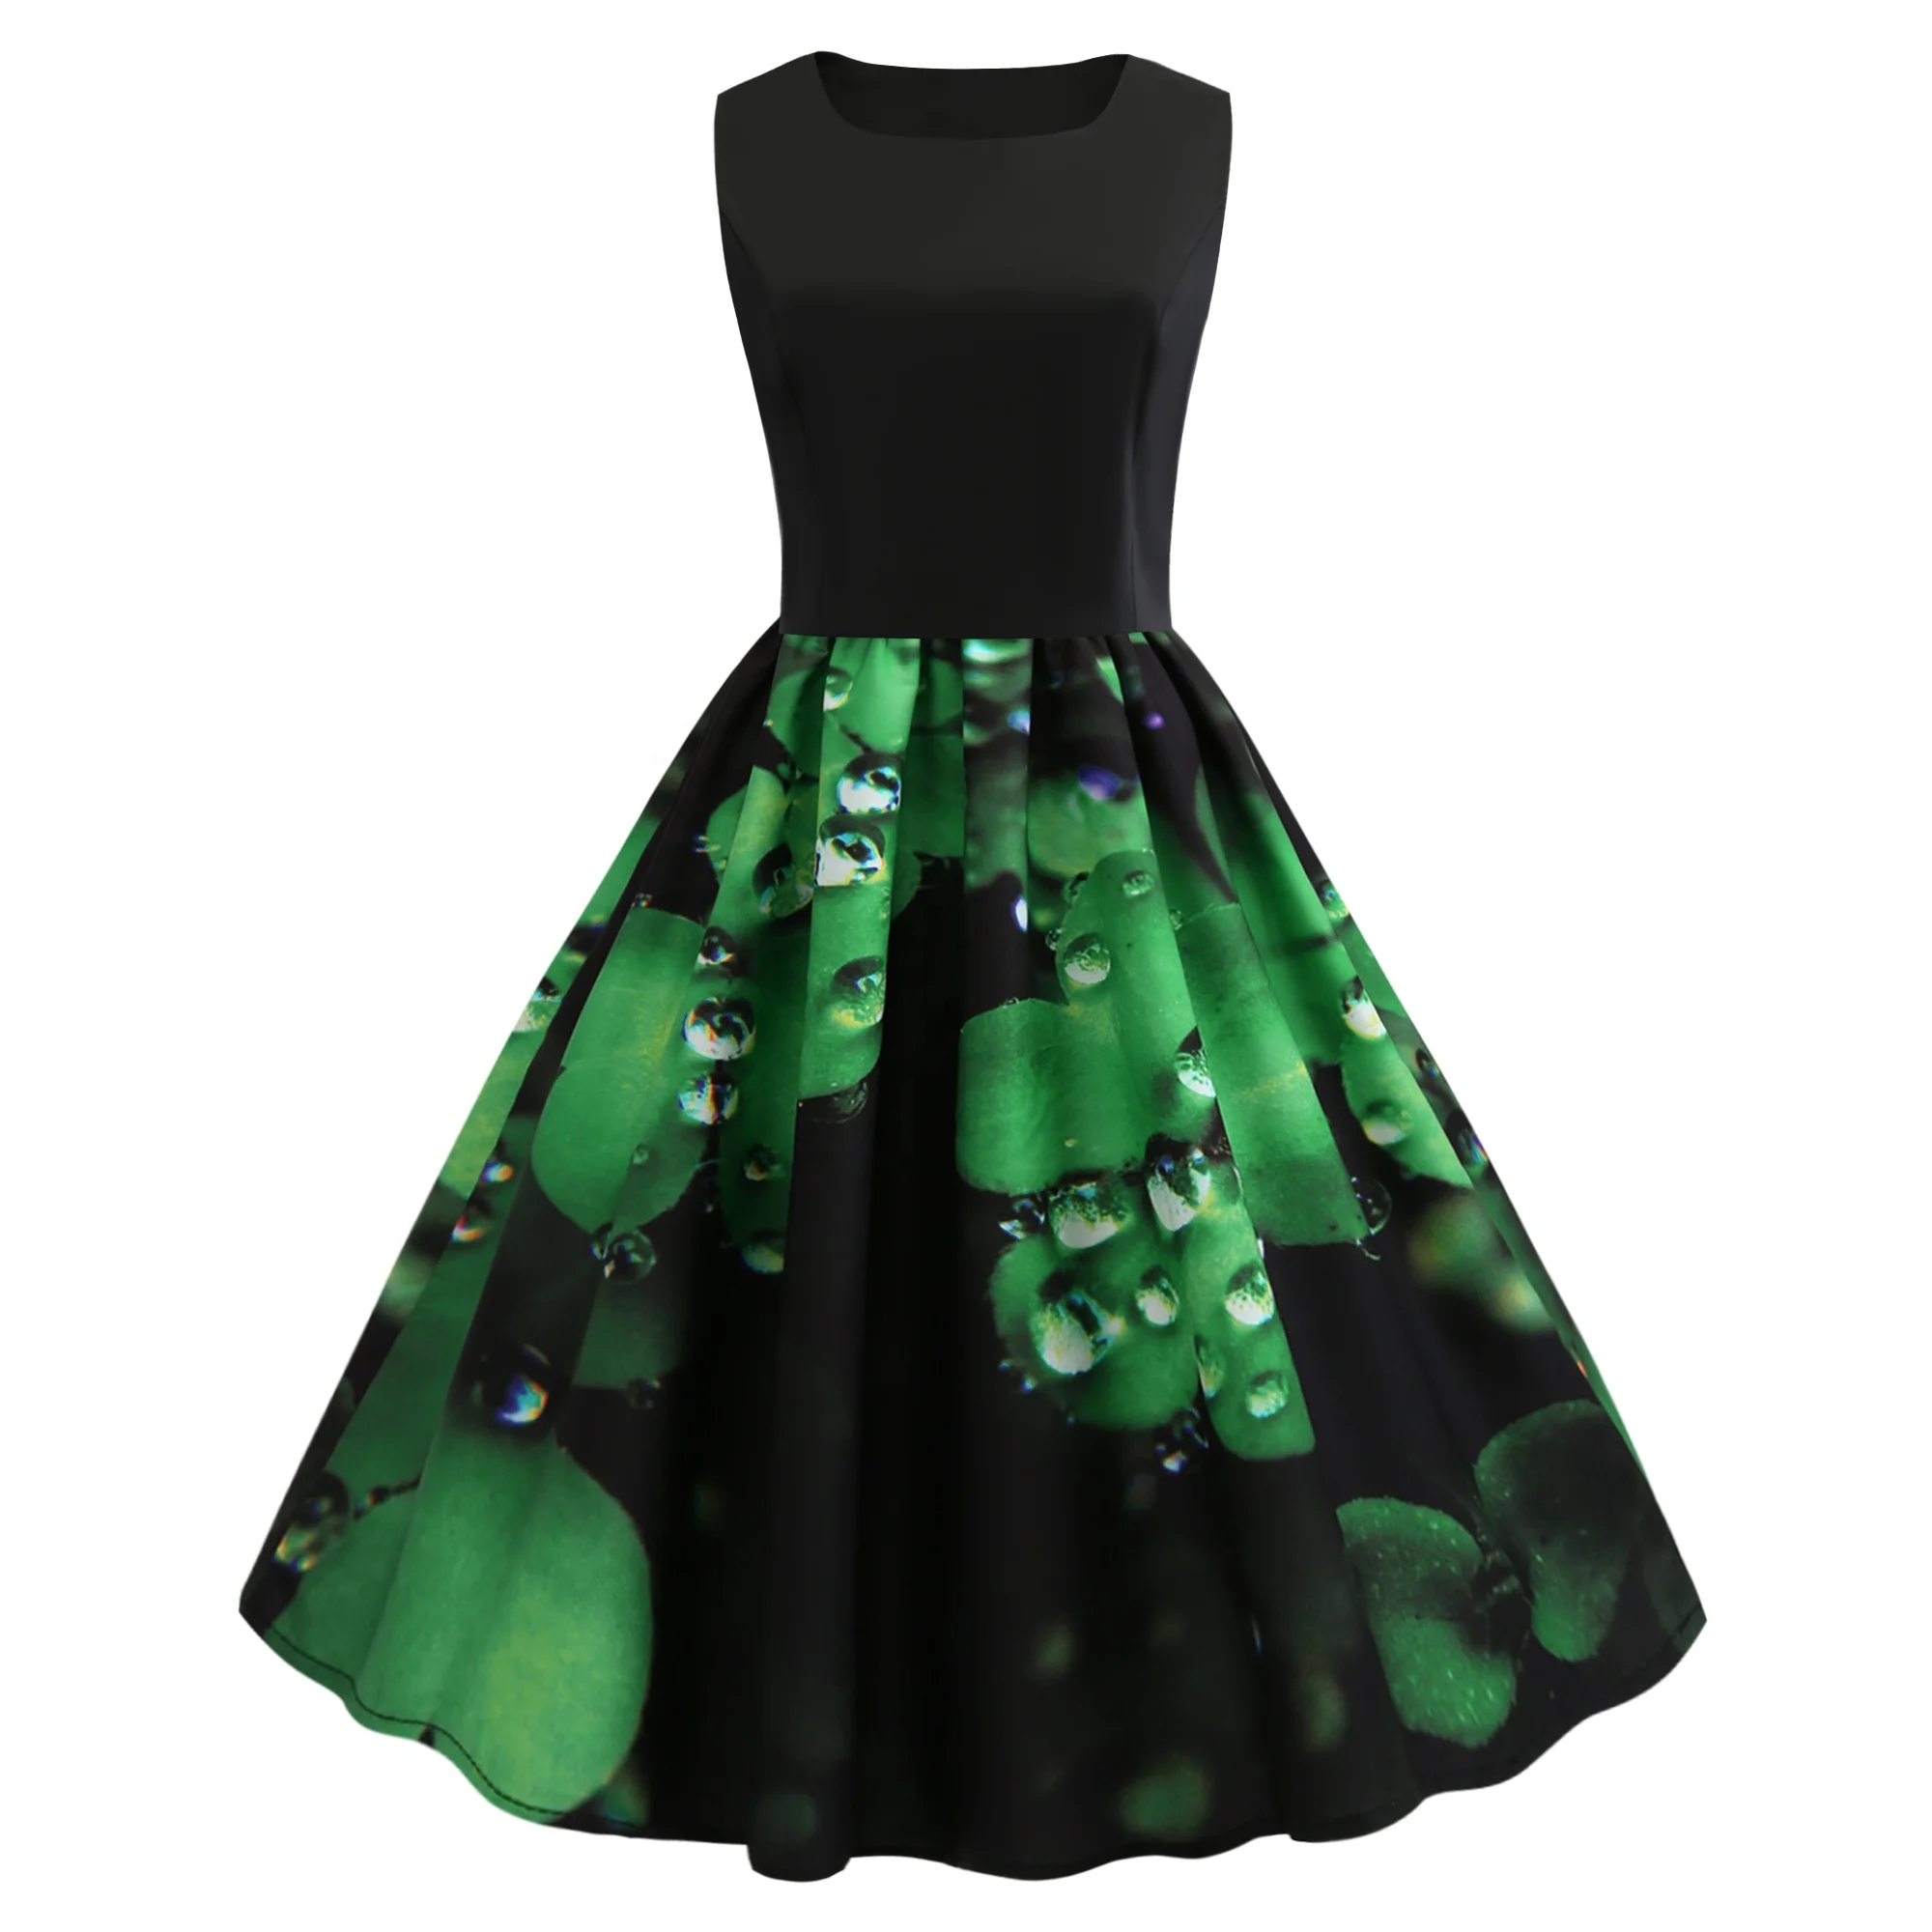 

SP-1104 Wholesales St. Patrick's Day Clothing 3D Water Drop Clover Black Top Reto Vintage Cocktail Party Spring Summer Dress, Shown